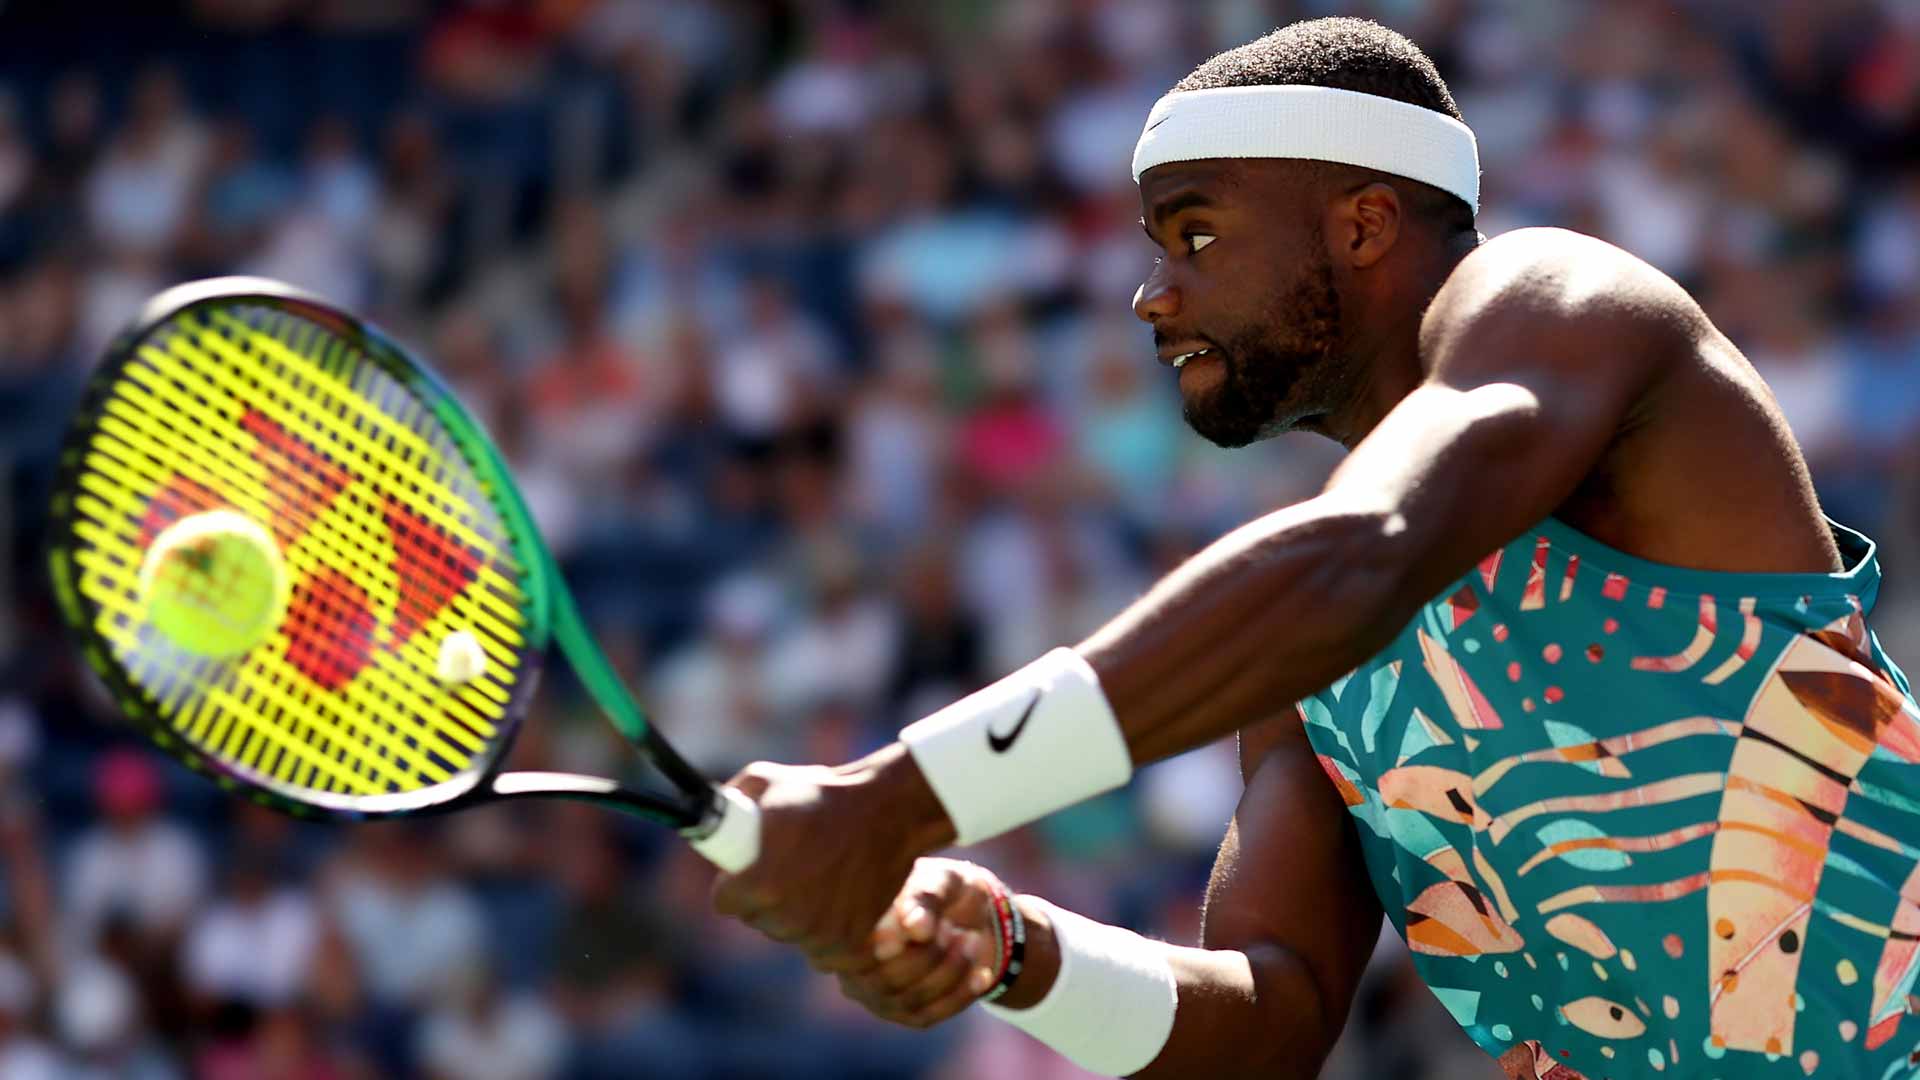 Frances Tiafoe in action Friday at the US Open.